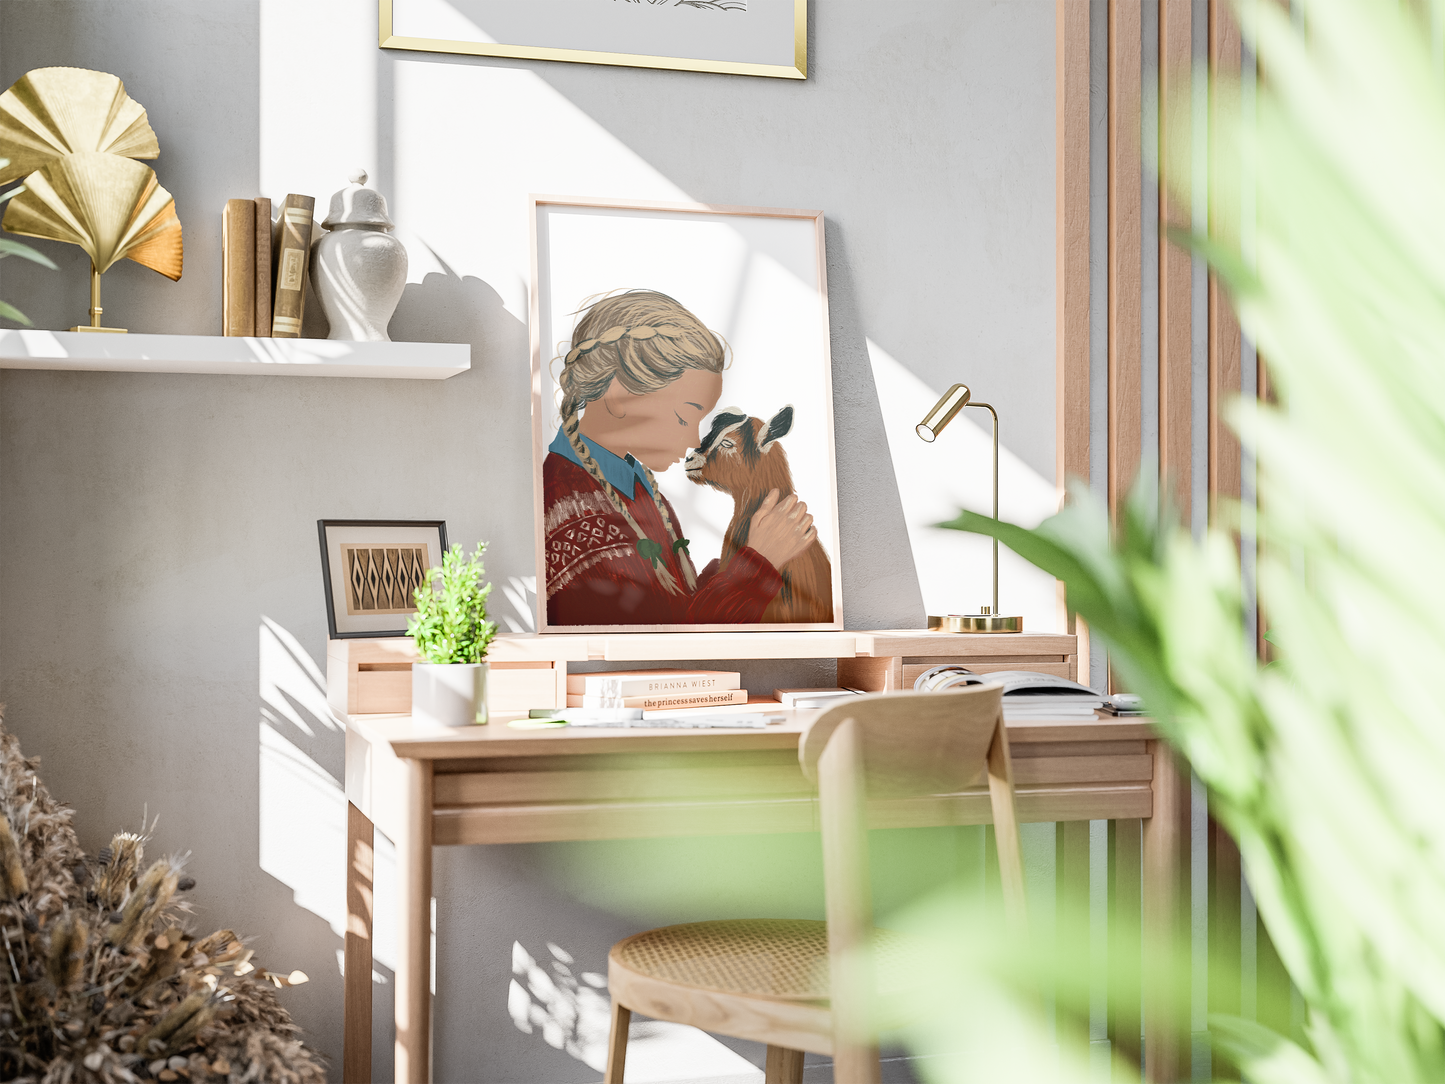 A bright workspace with a printable digital painting of a girl and a goat framed on the desk, contributing to a creative and peaceful atmosphere